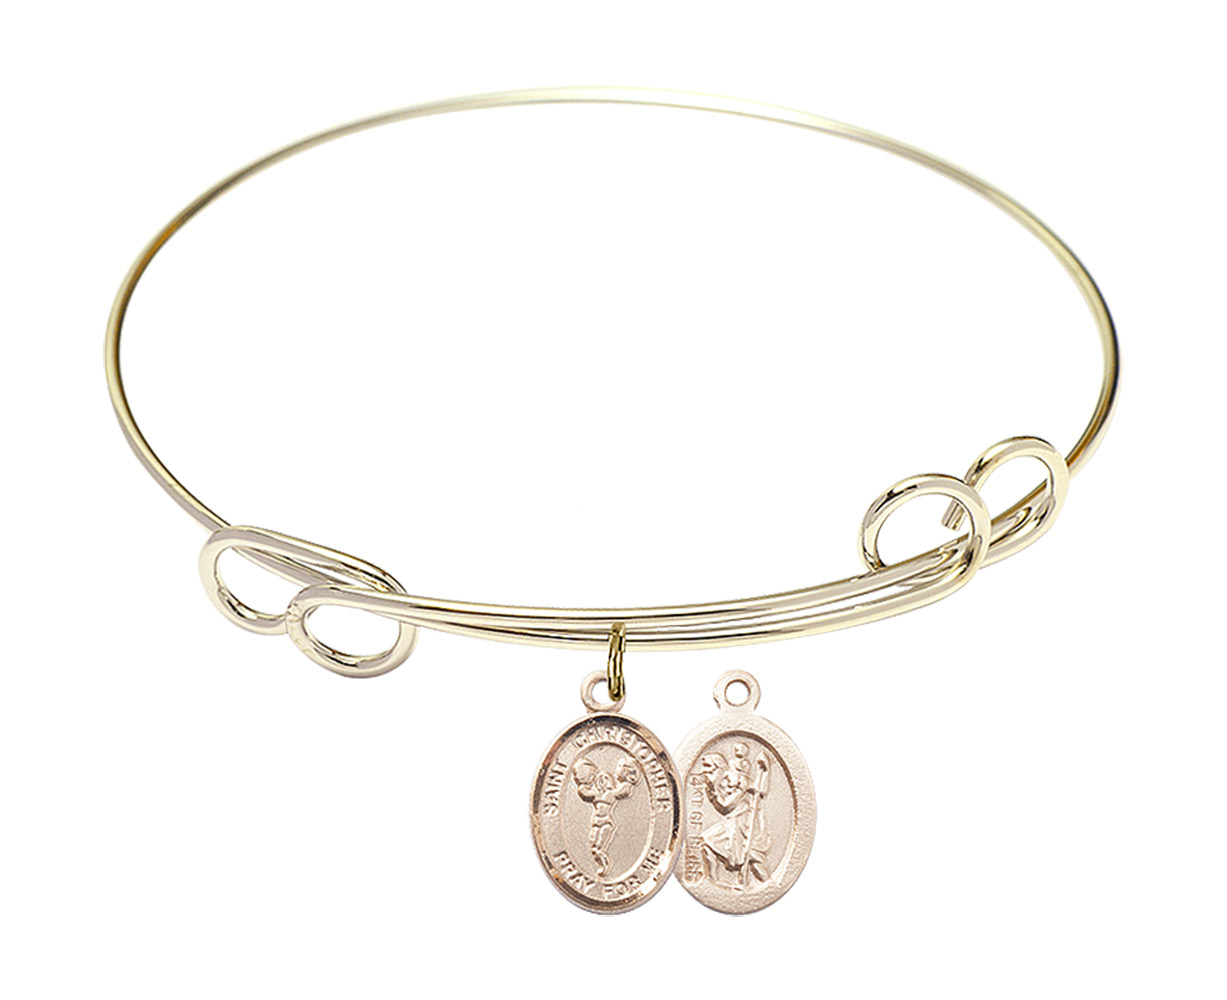 St Christopher - Cheerleading Double Loop Bangle Bracelet - Gold-Filled Charm